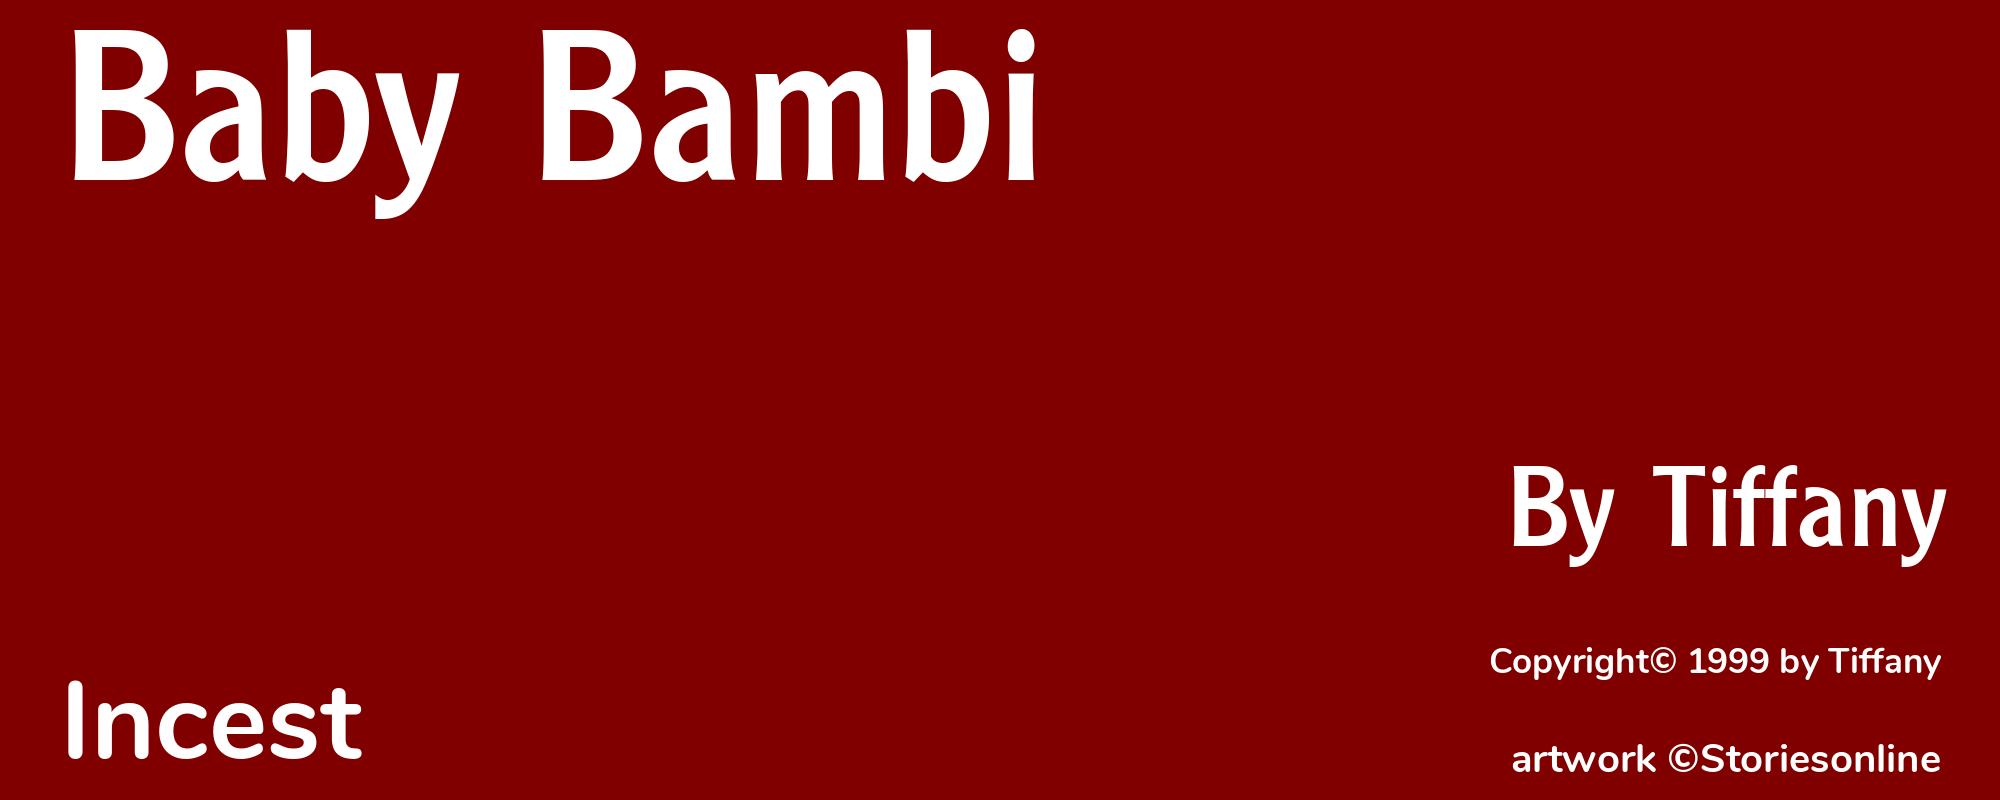 Baby Bambi - Cover